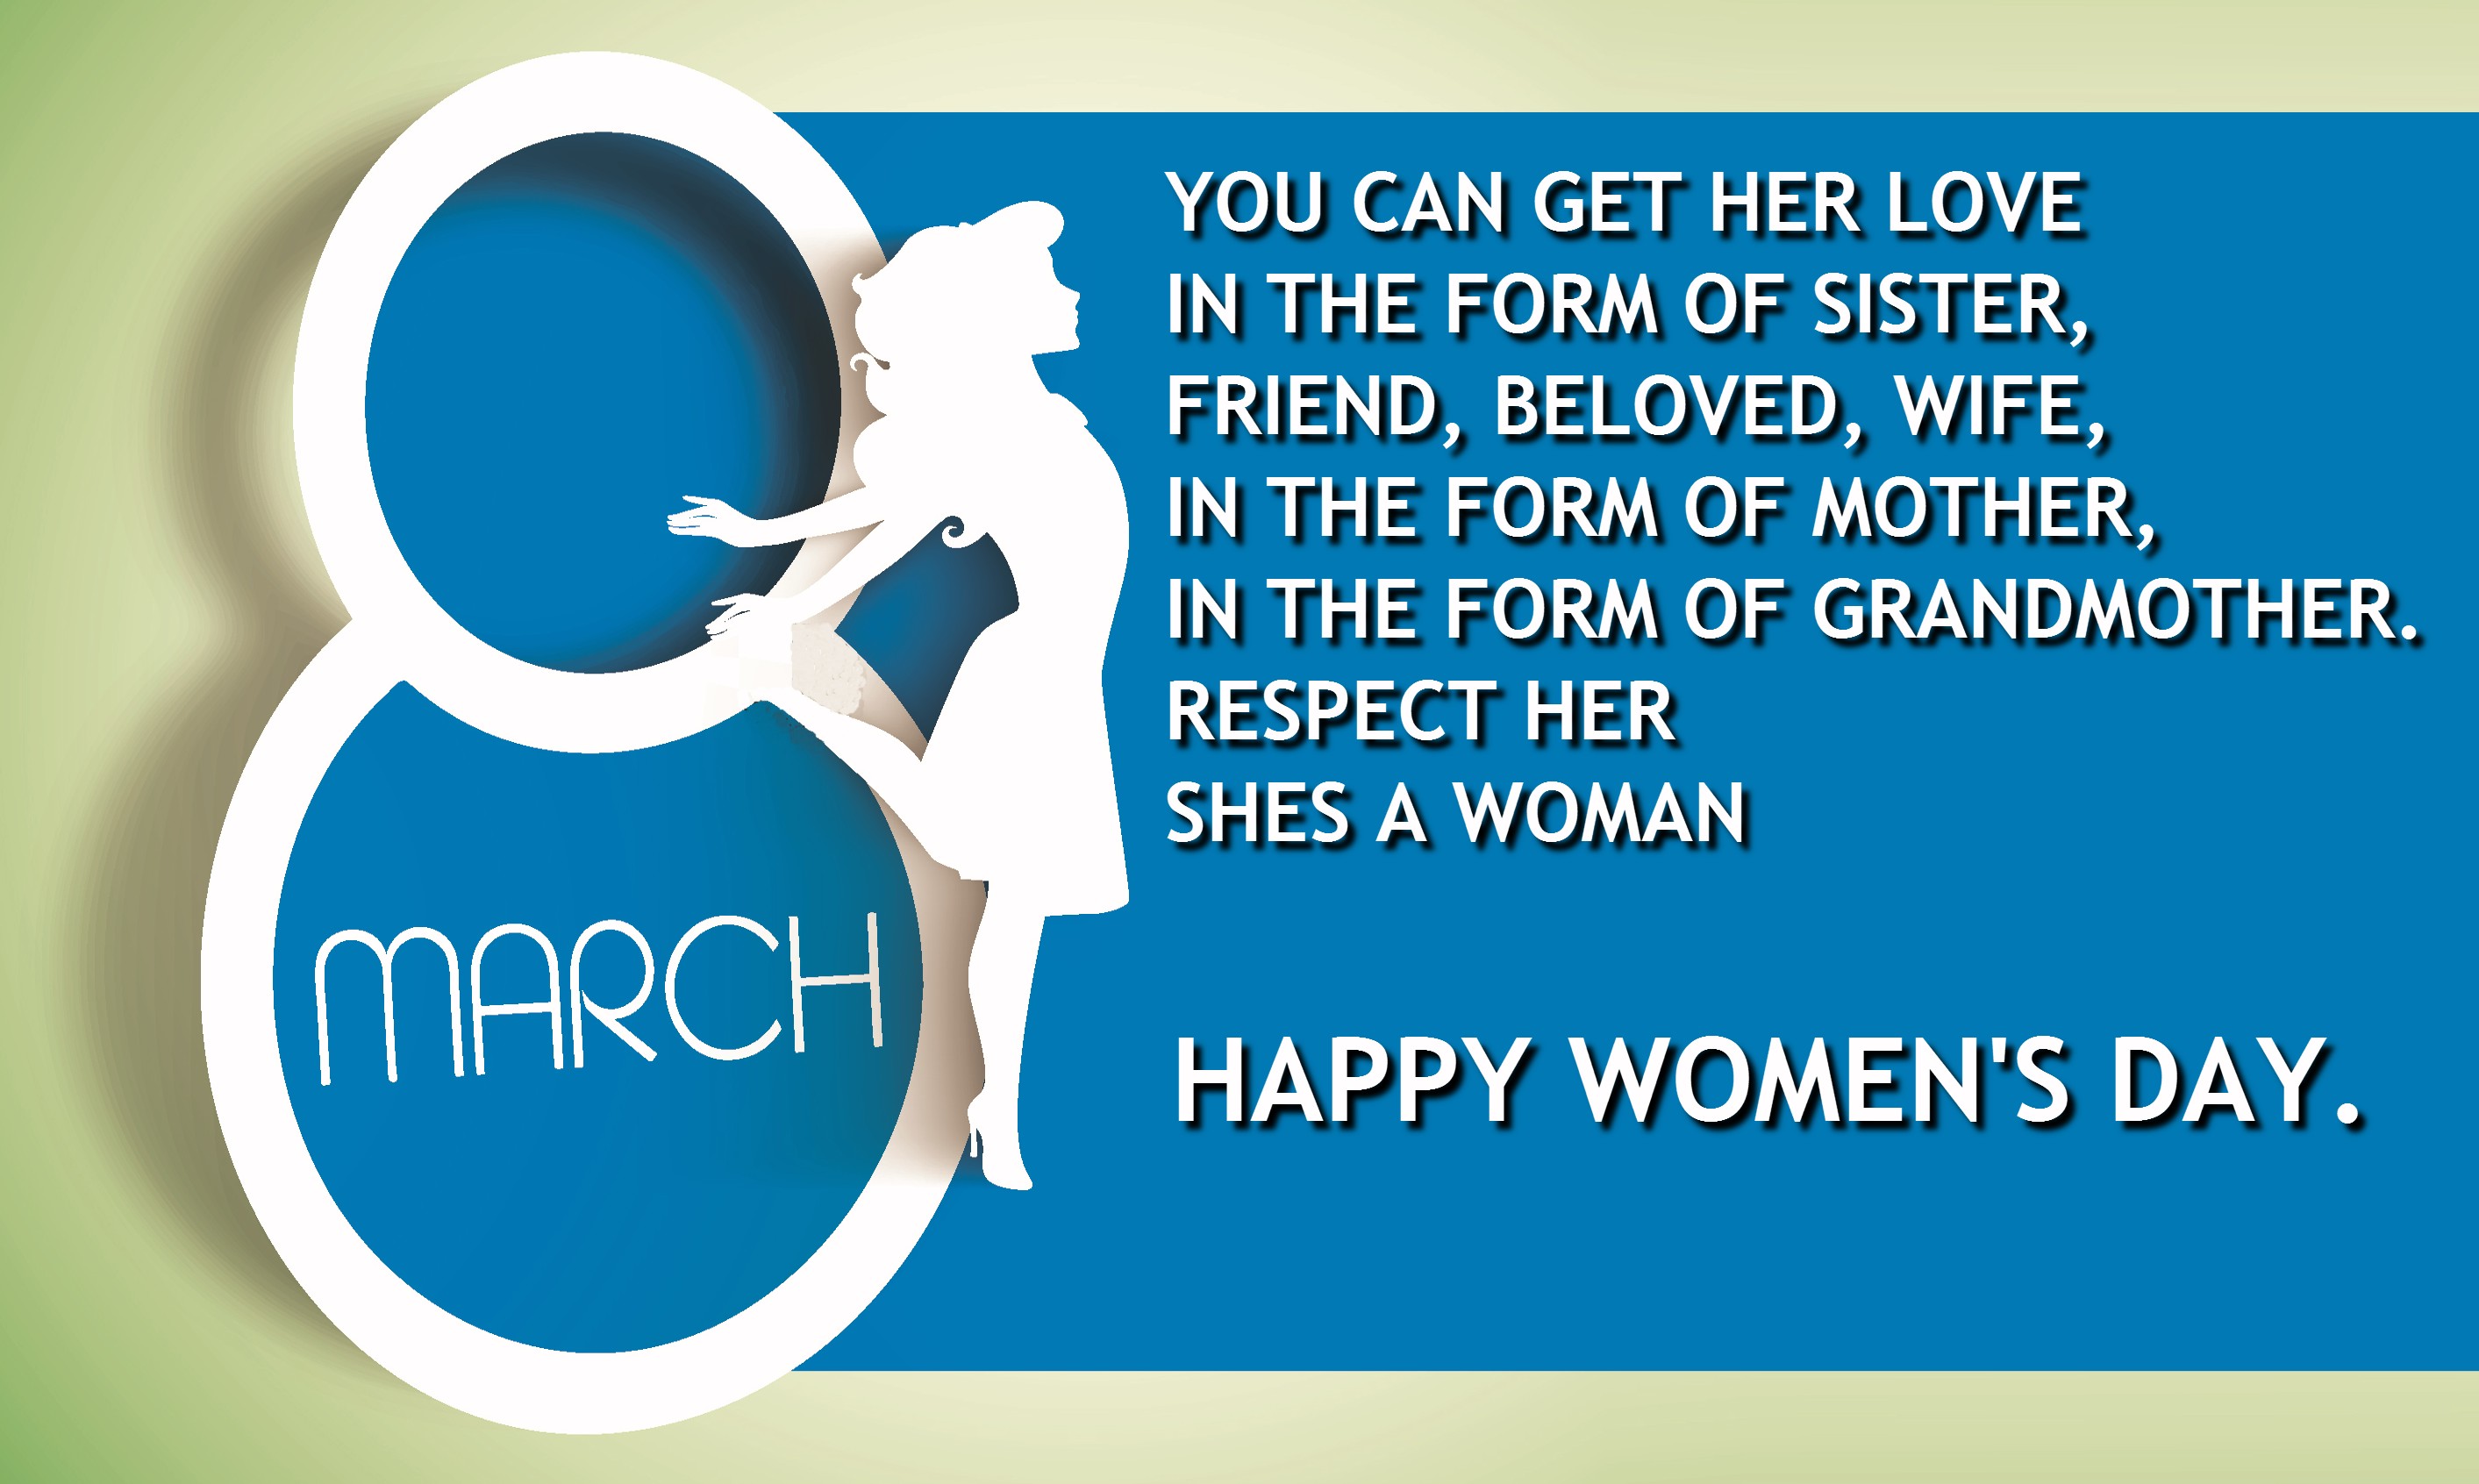 holiday, women's day, eight, happy women's day, statement